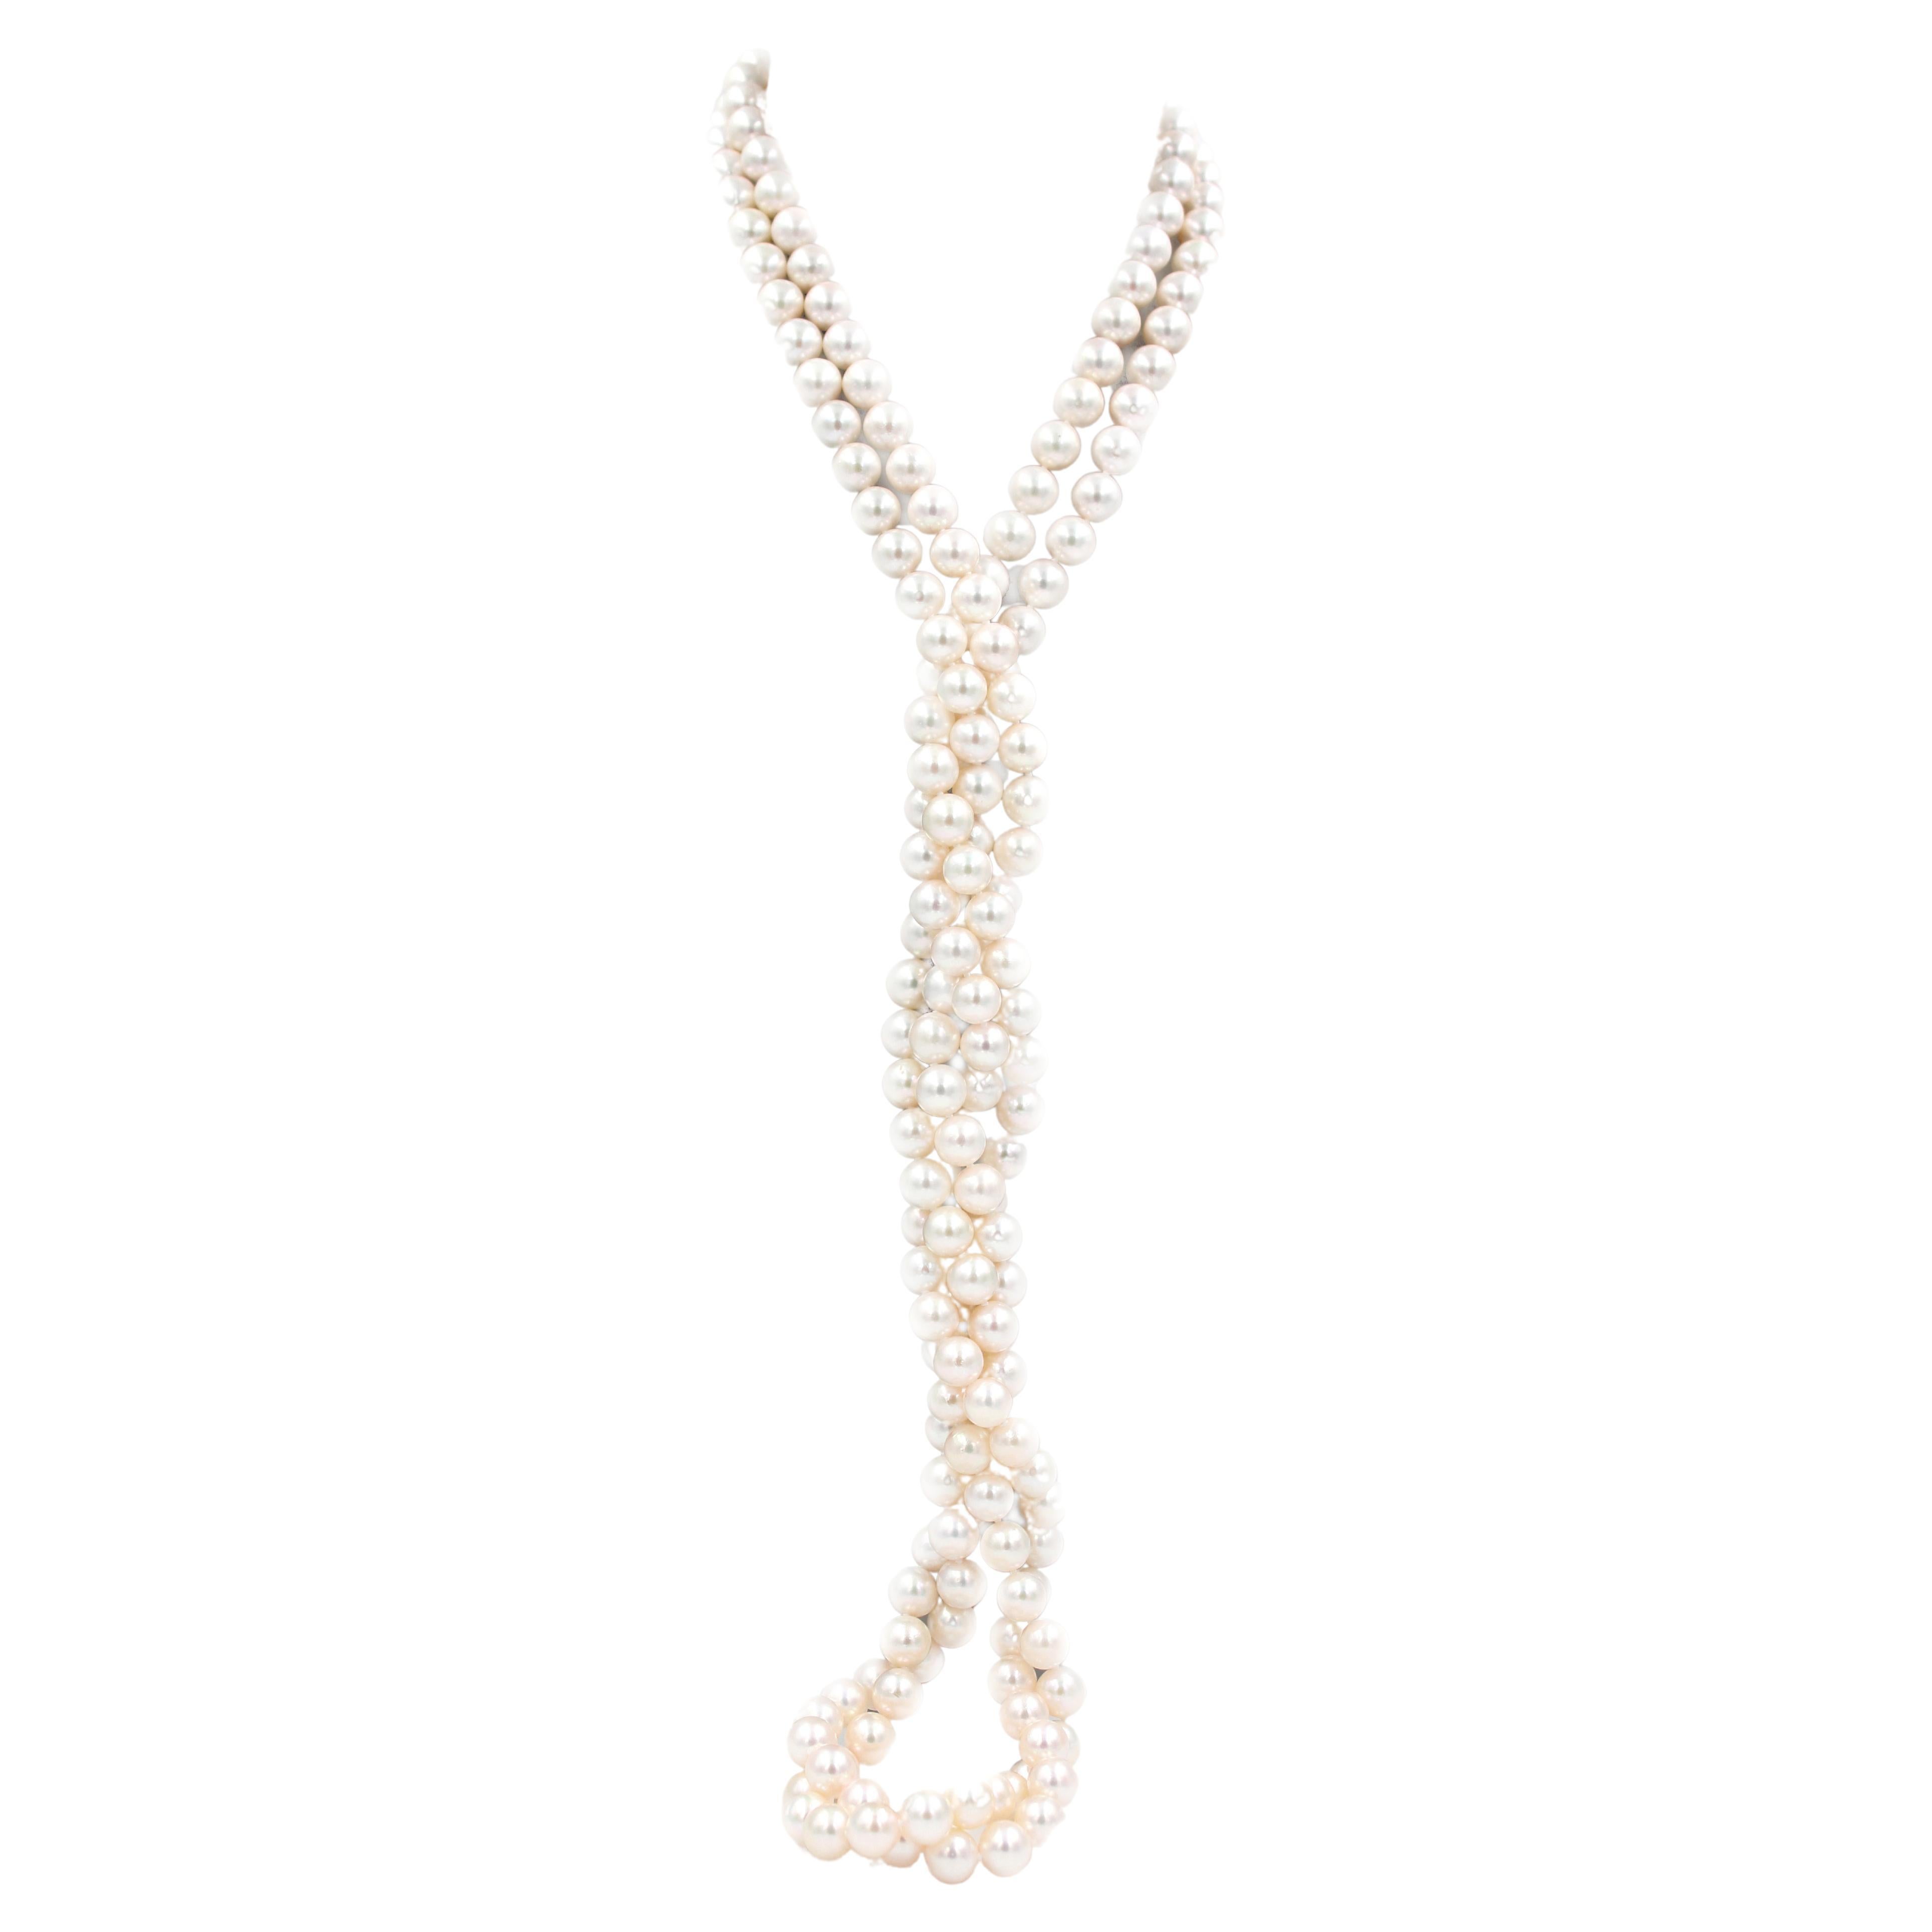 Classic White Cultured Japanese Akoya Opera Pearl Luxury Necklace 30 inches Long For Sale